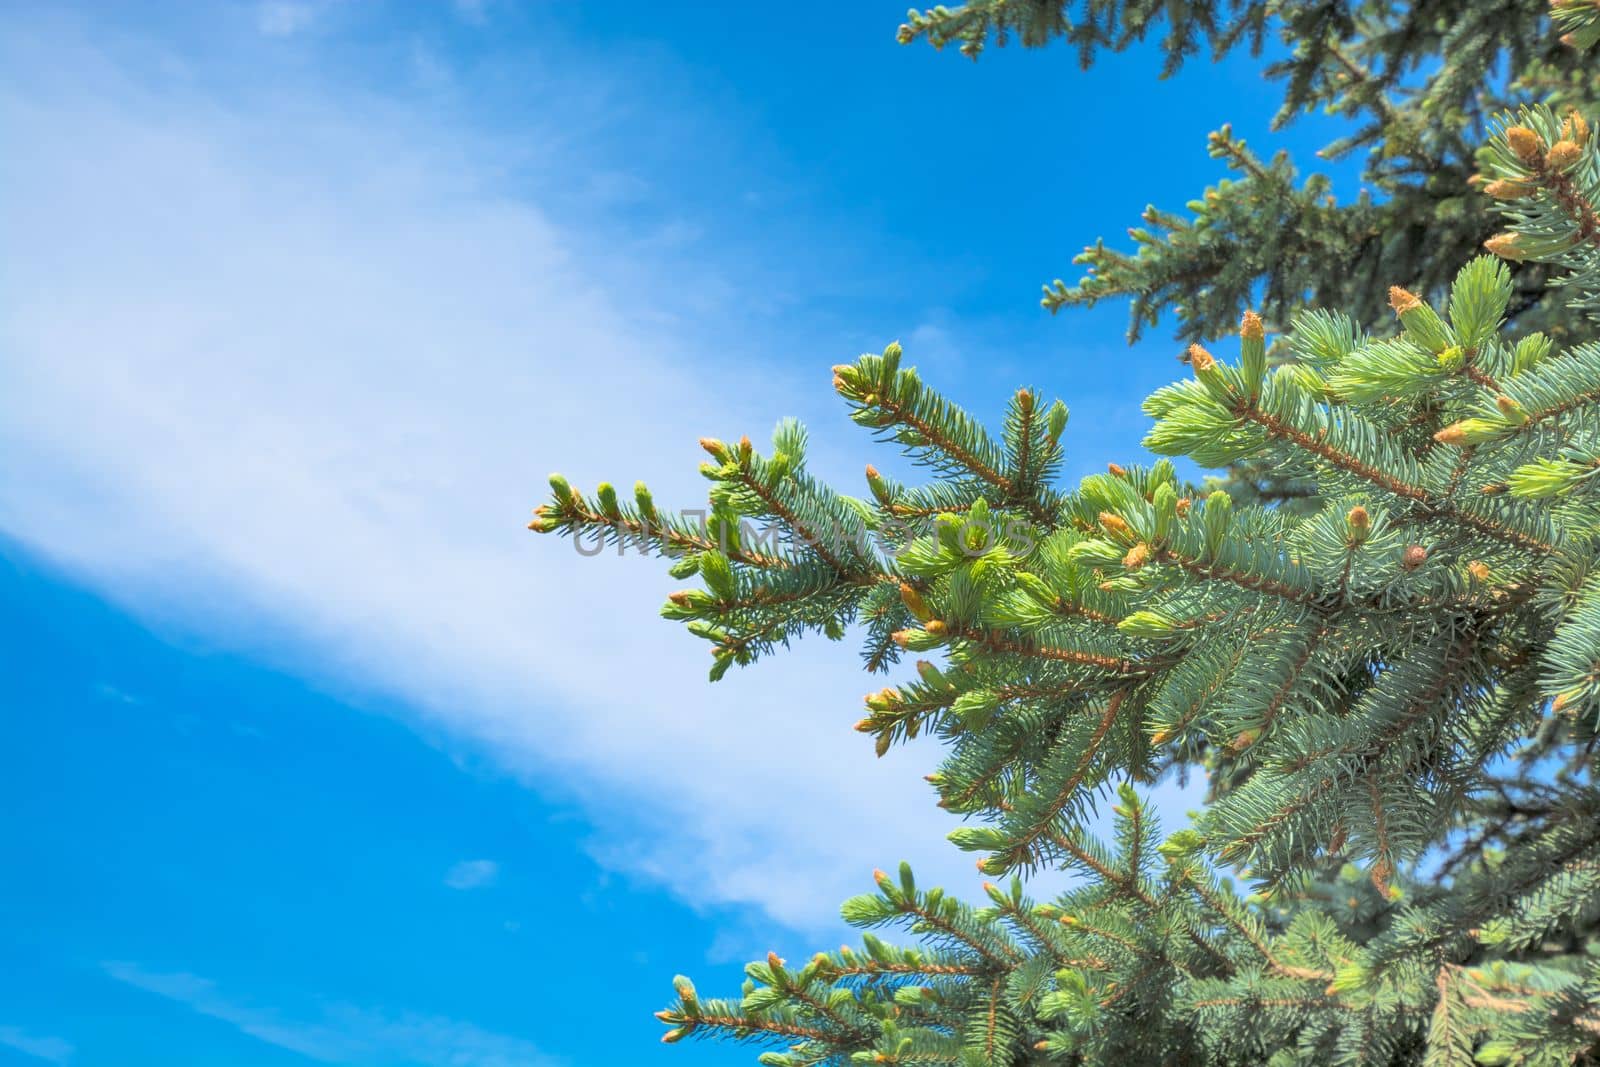 Blossoming pinetree branches on blue sky background.